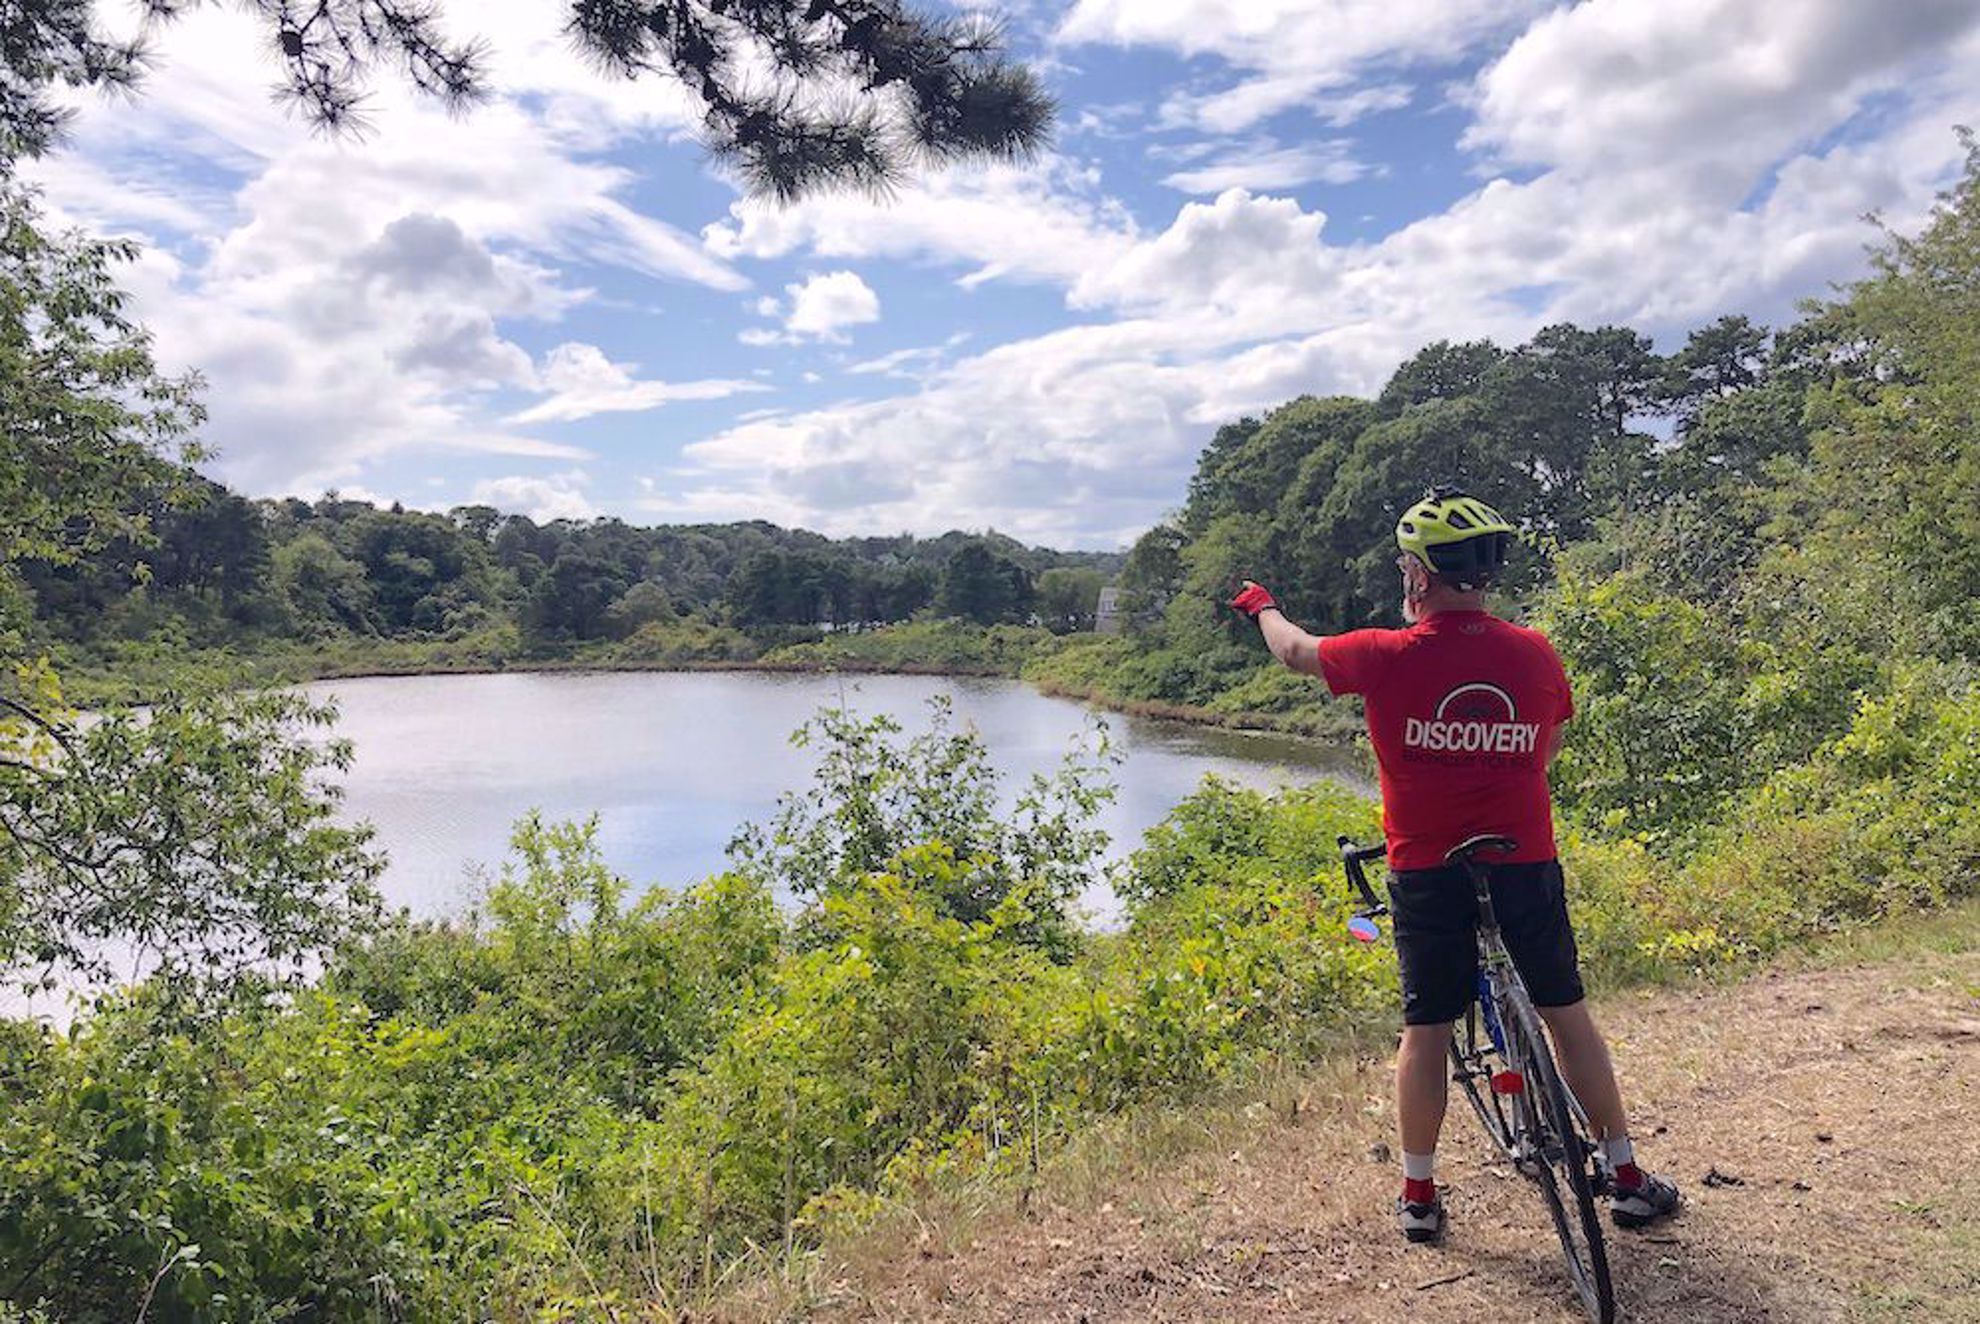 Riding by pond on Cape Cod